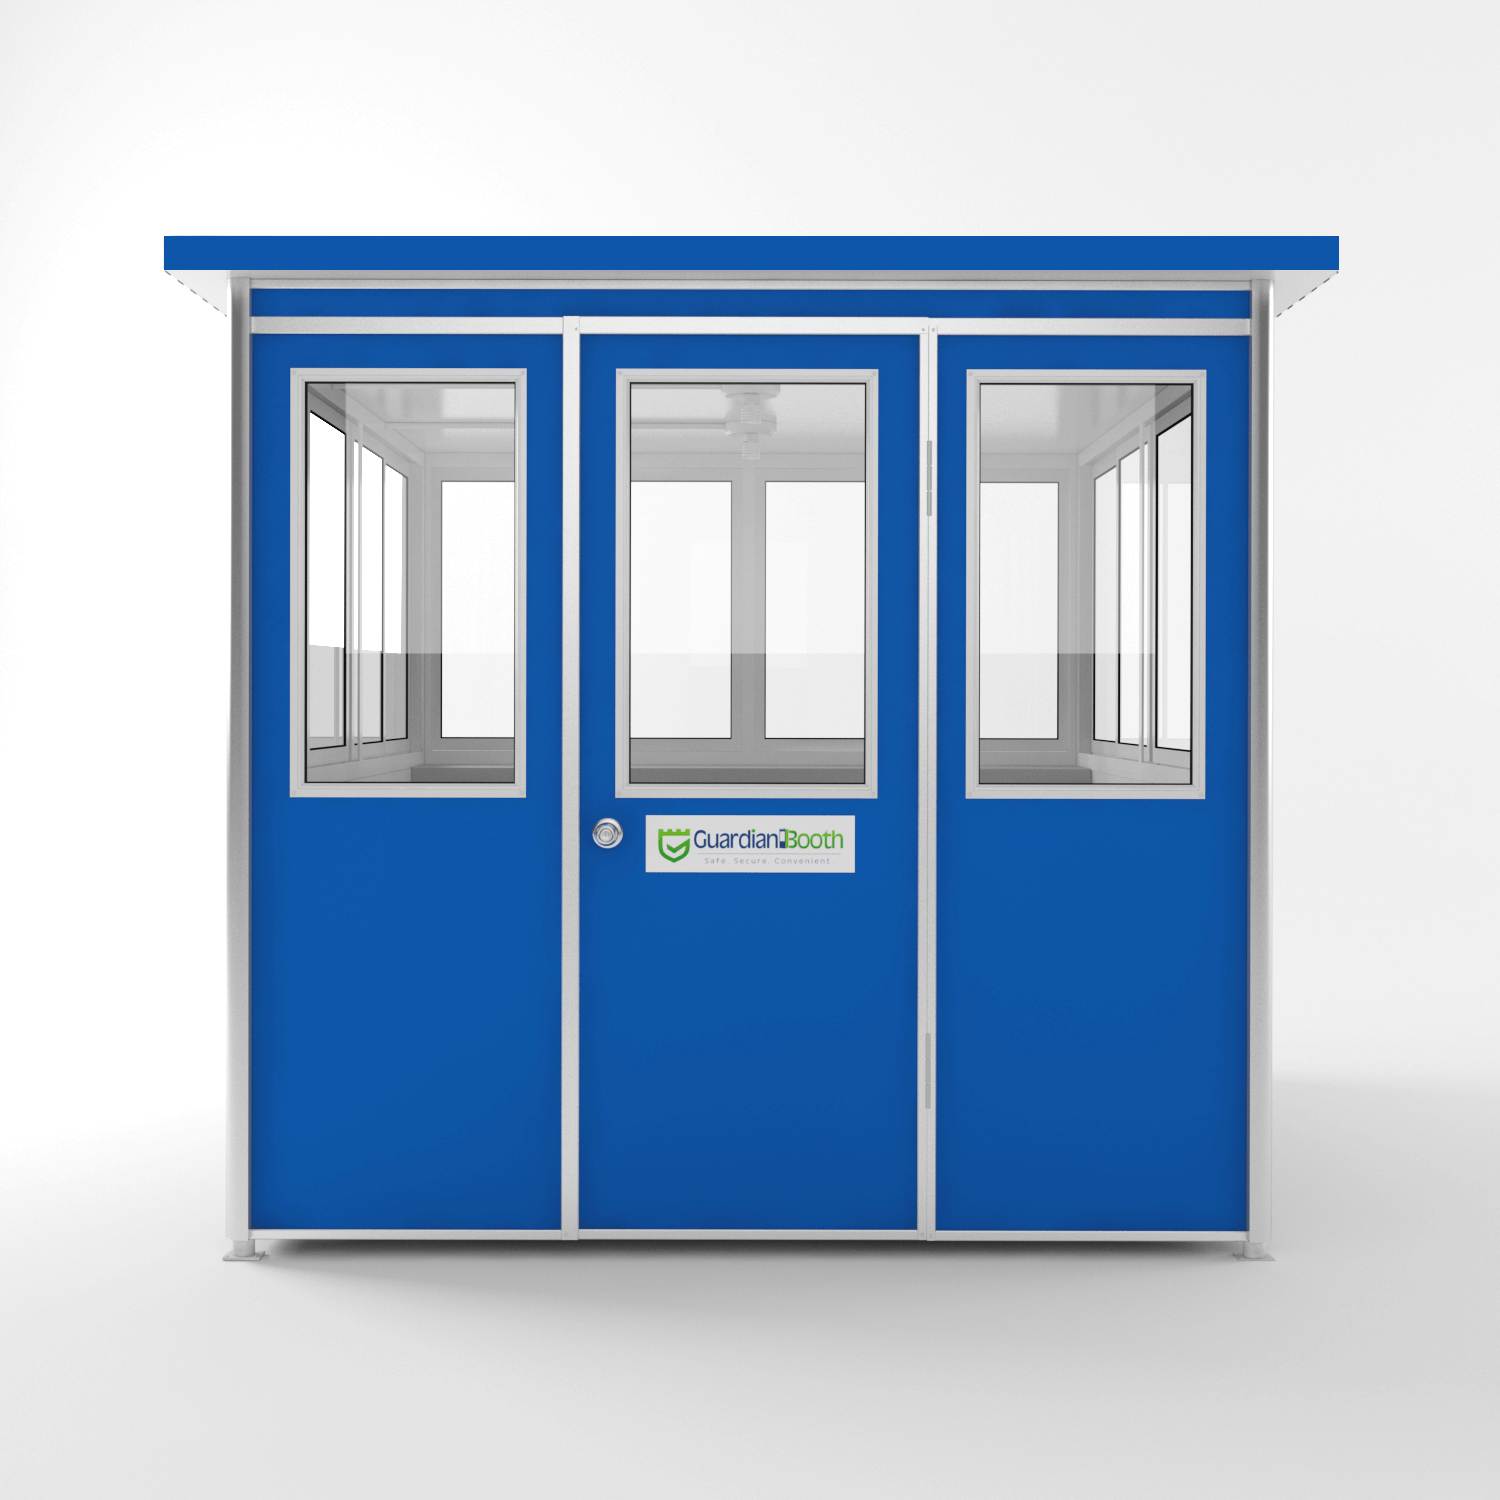 8×8 Prefabricated Guardian Booth